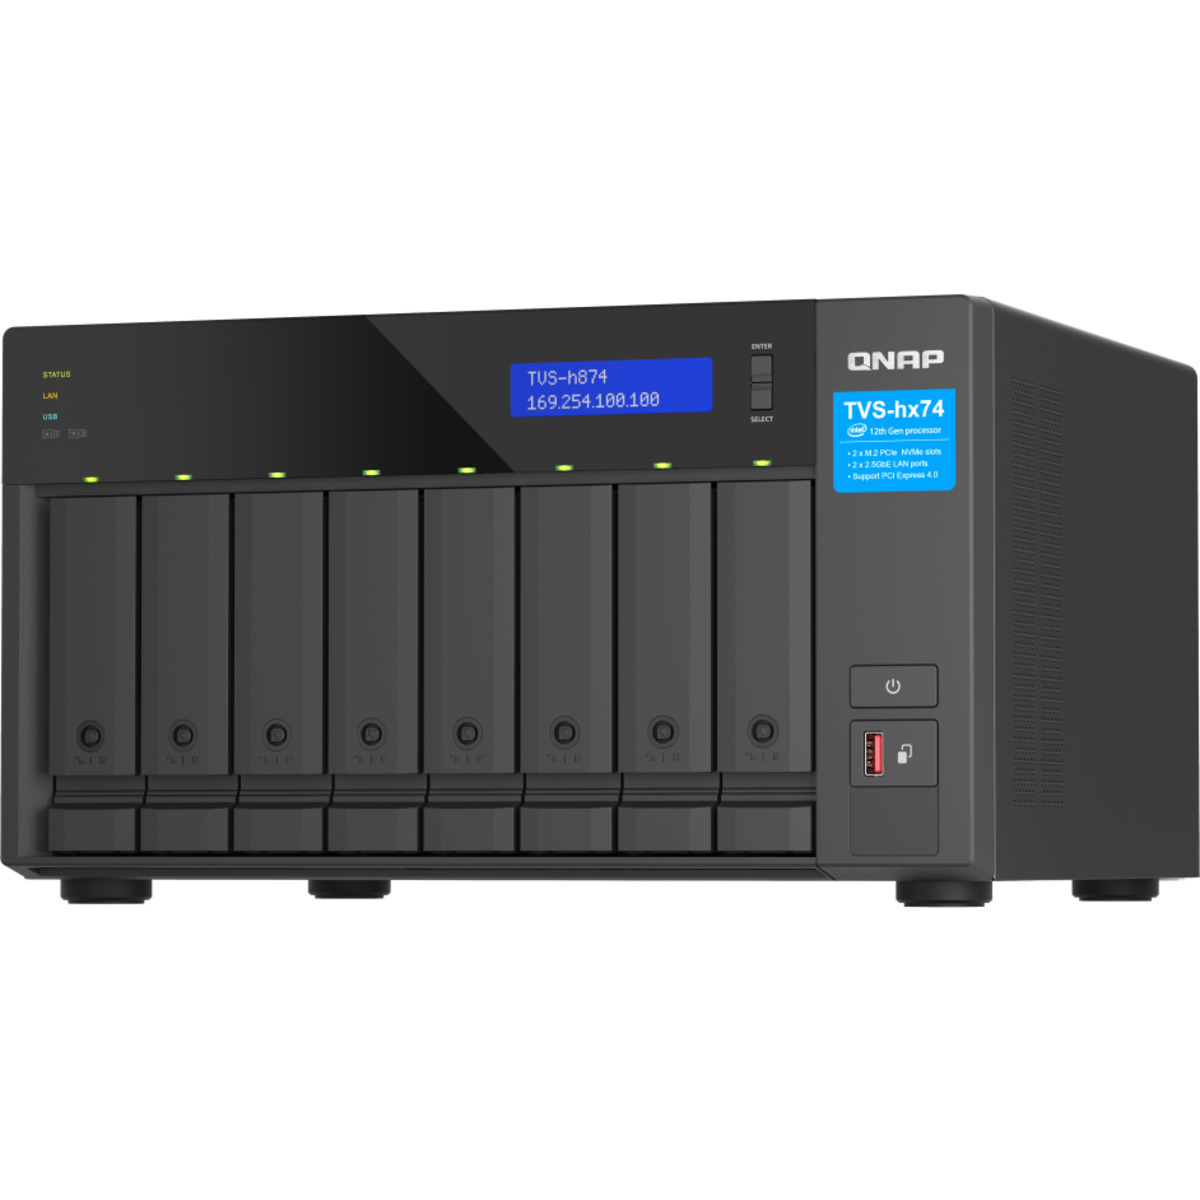 QNAP TVS-h874 Core i7 20tb 8-Bay Desktop Multimedia / Power User / Business NAS - Network Attached Storage Device 5x4tb Seagate BarraCuda ST4000DM004 3.5 7200rpm SATA 6Gb/s HDD CONSUMER Class Drives Installed - Burn-In Tested TVS-h874 Core i7